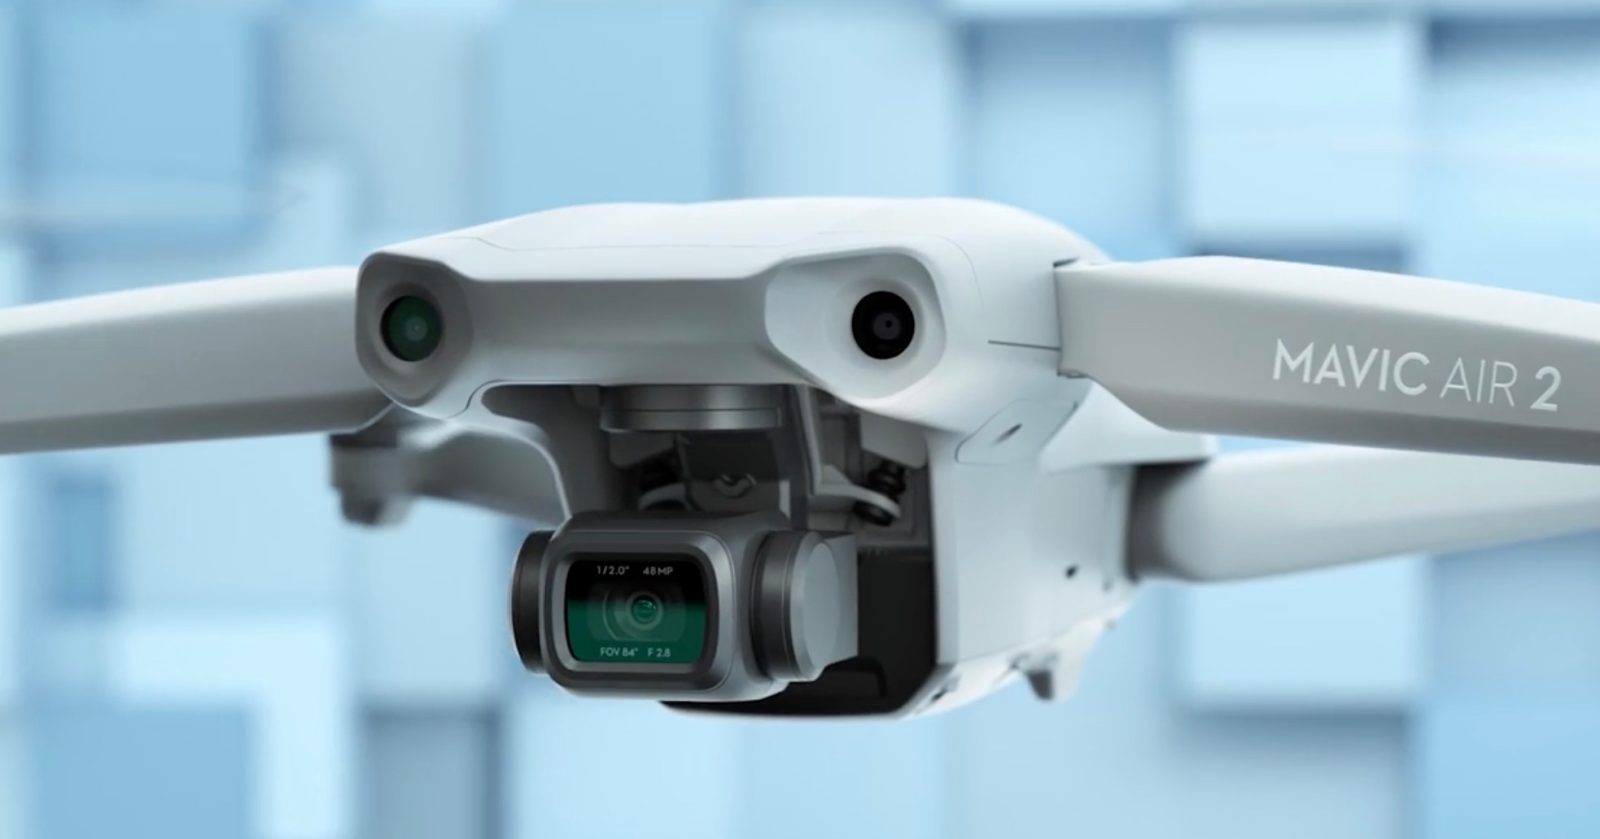 DJI Mavic Air 2 review: Major upgrade with 48mp/4K60 cam is more